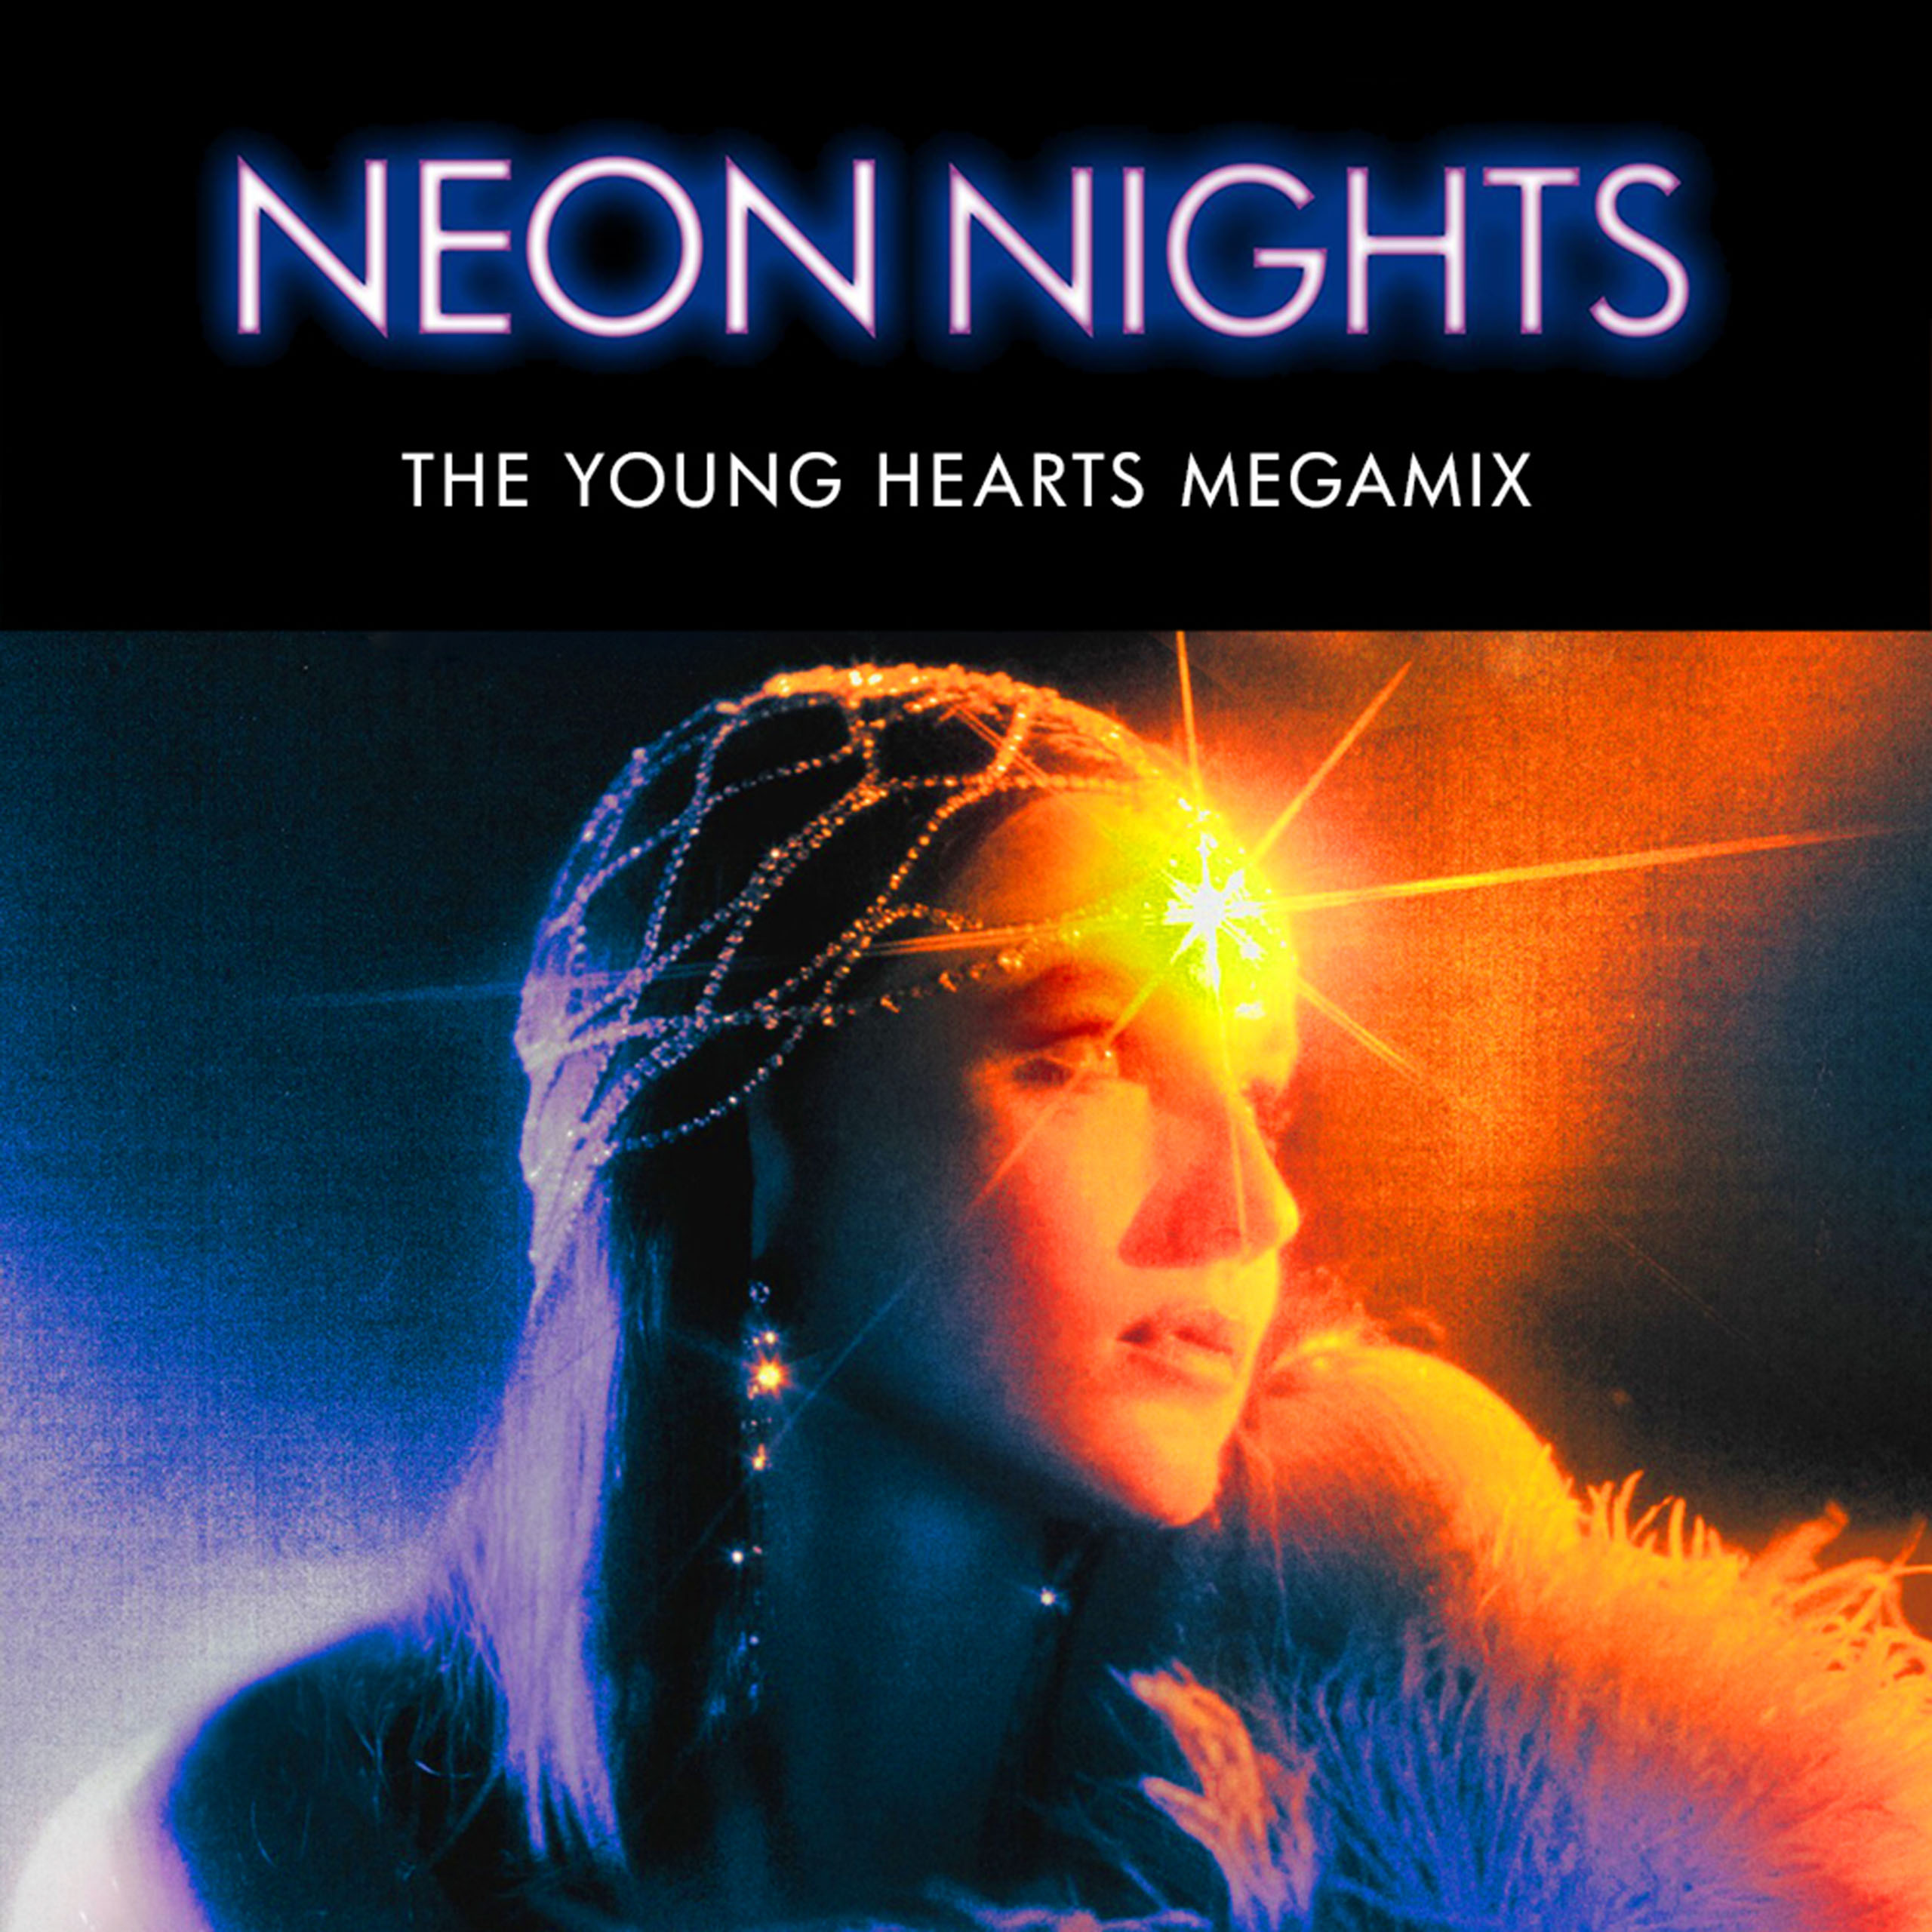 Show 625 – The Young Hearts Megamix